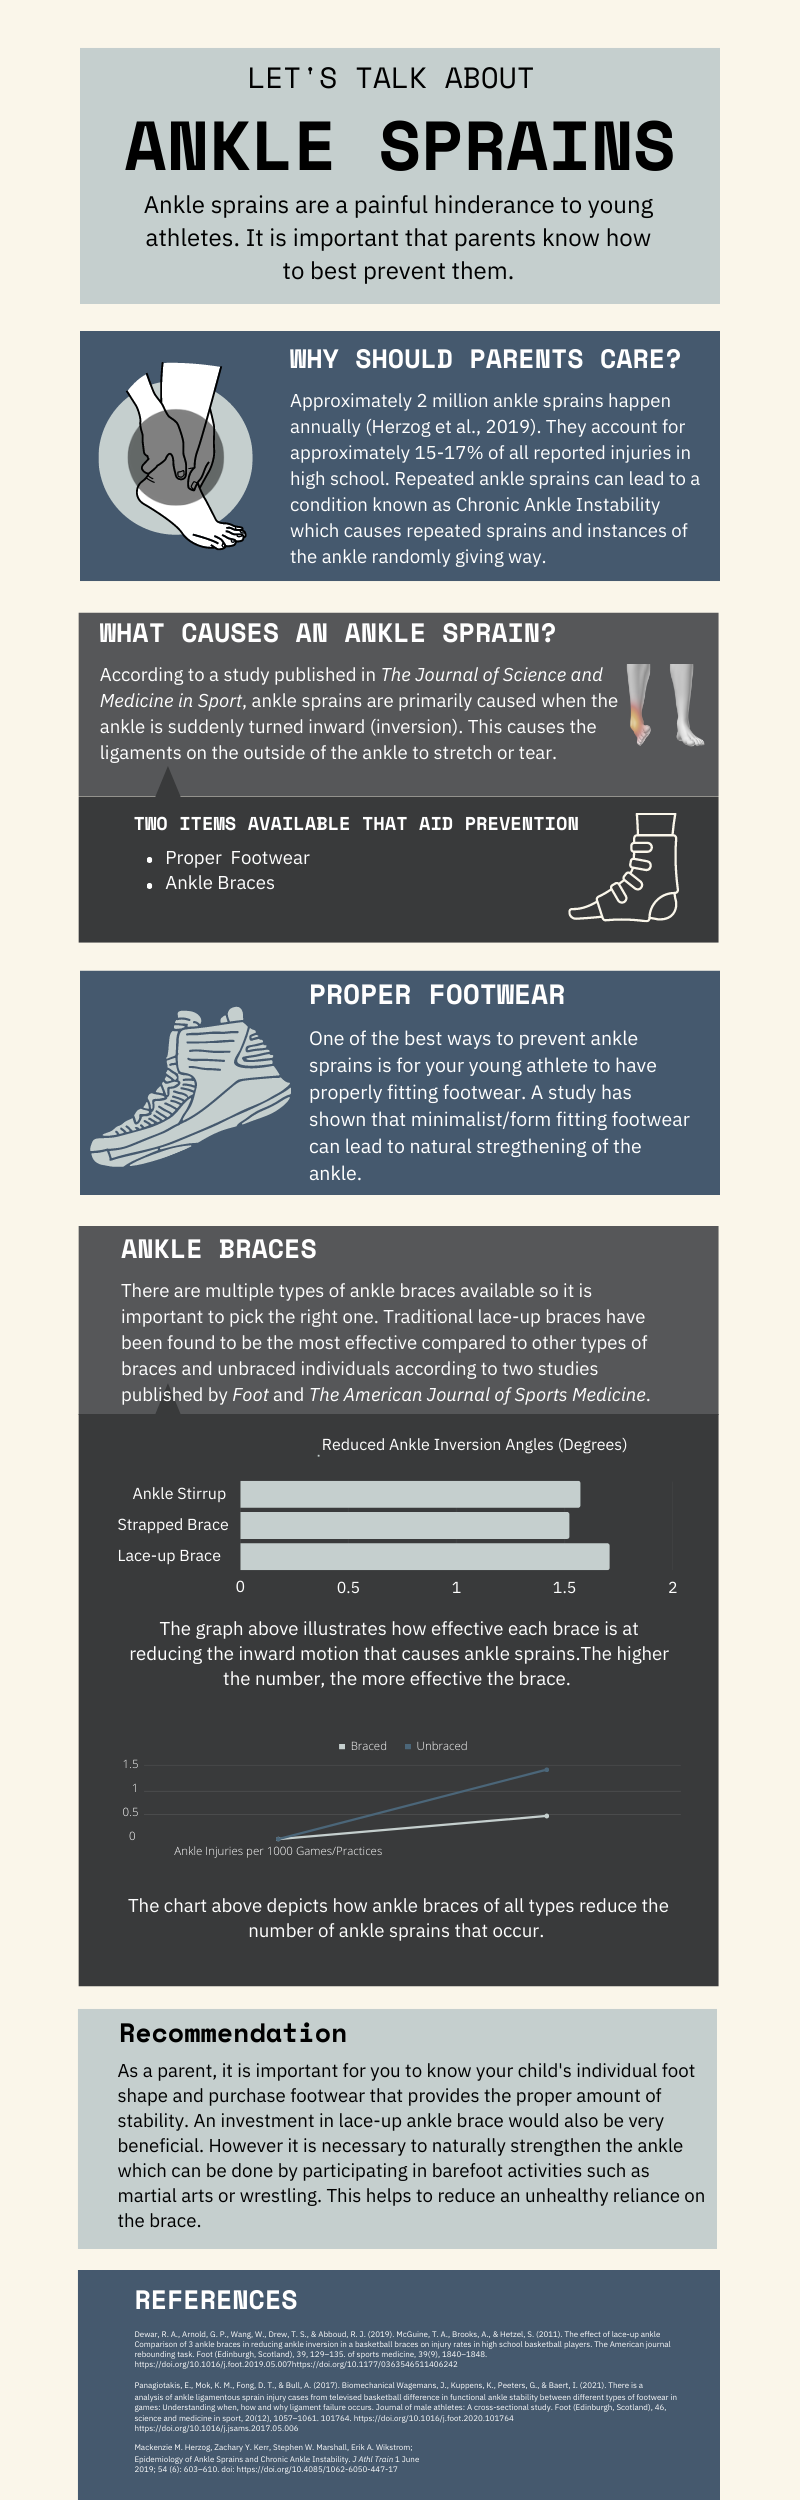 Let's talk about ankle sprains infographic